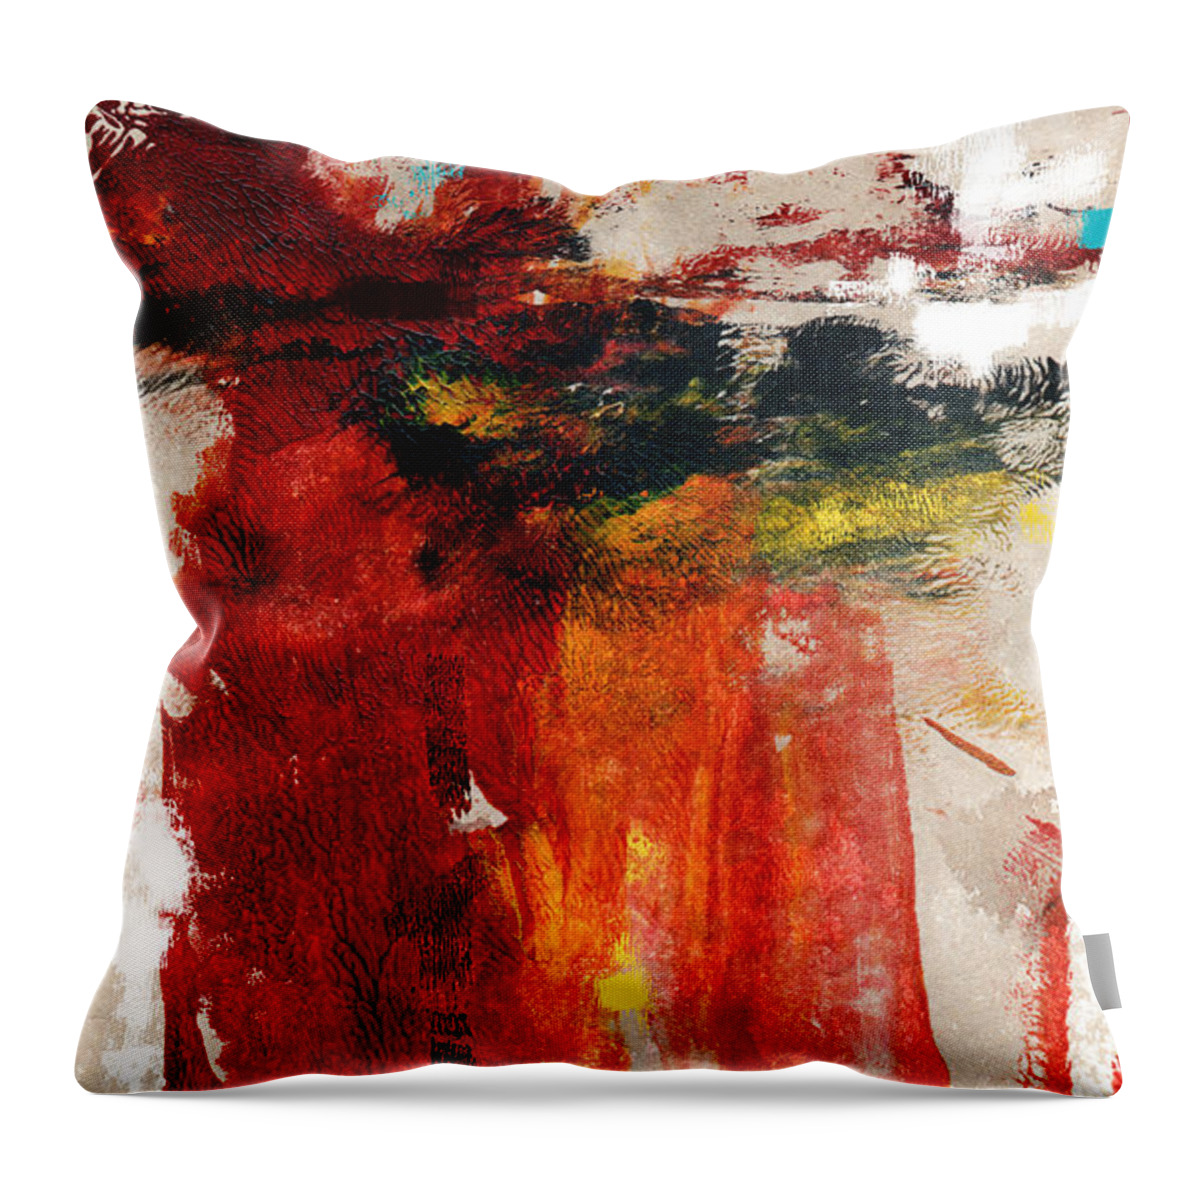 Abstract Throw Pillow featuring the mixed media August Night- Abstract Art by Linda Woods by Linda Woods